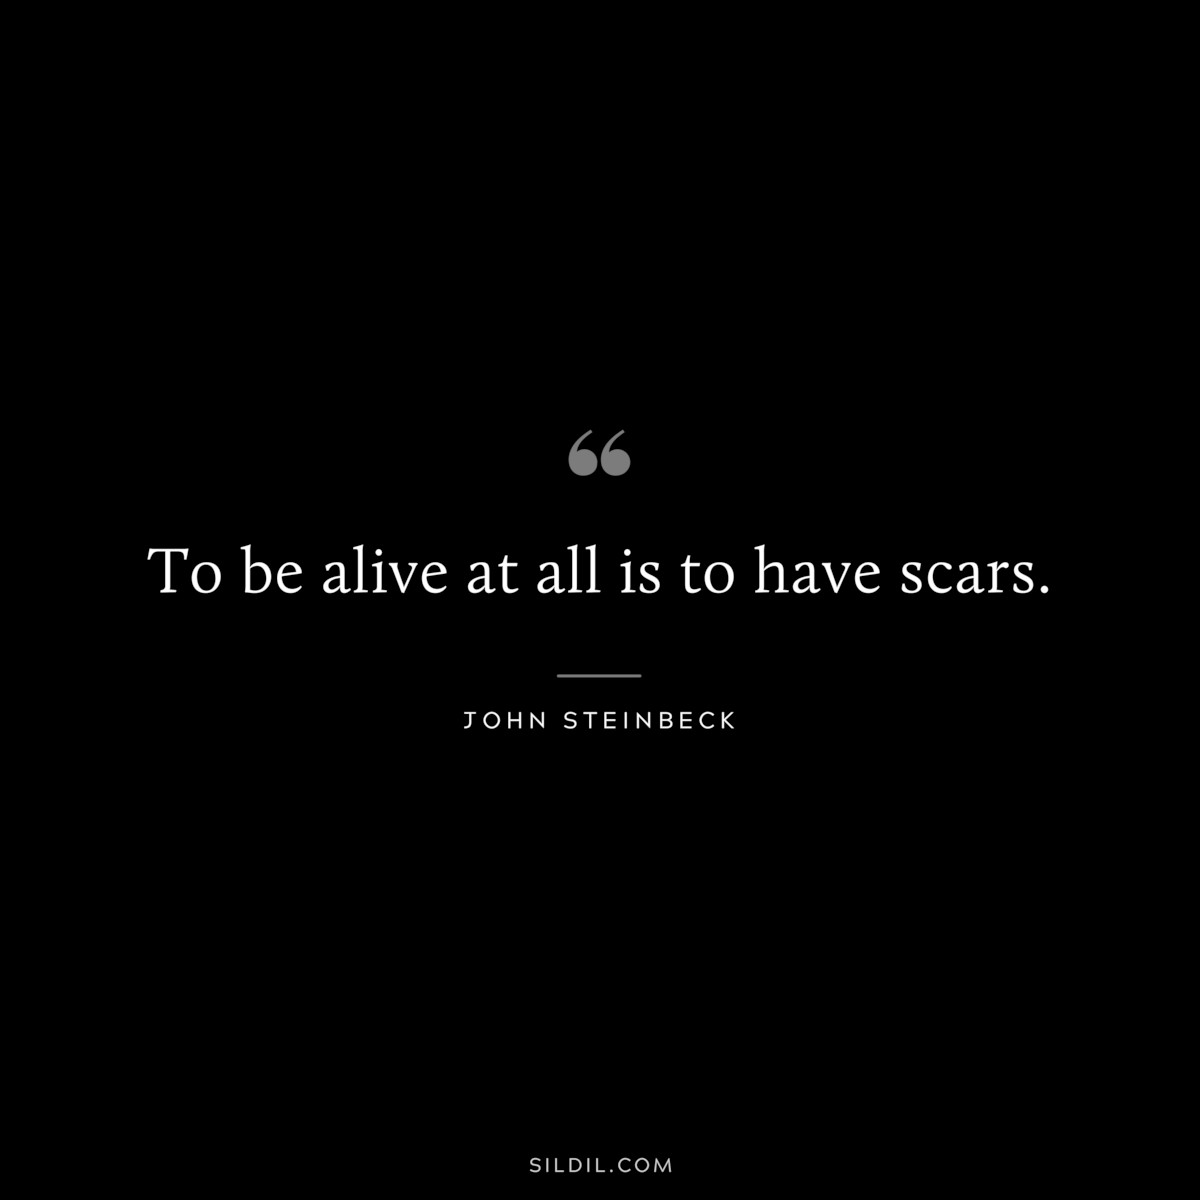 To be alive at all is to have scars.― John Steinbeck